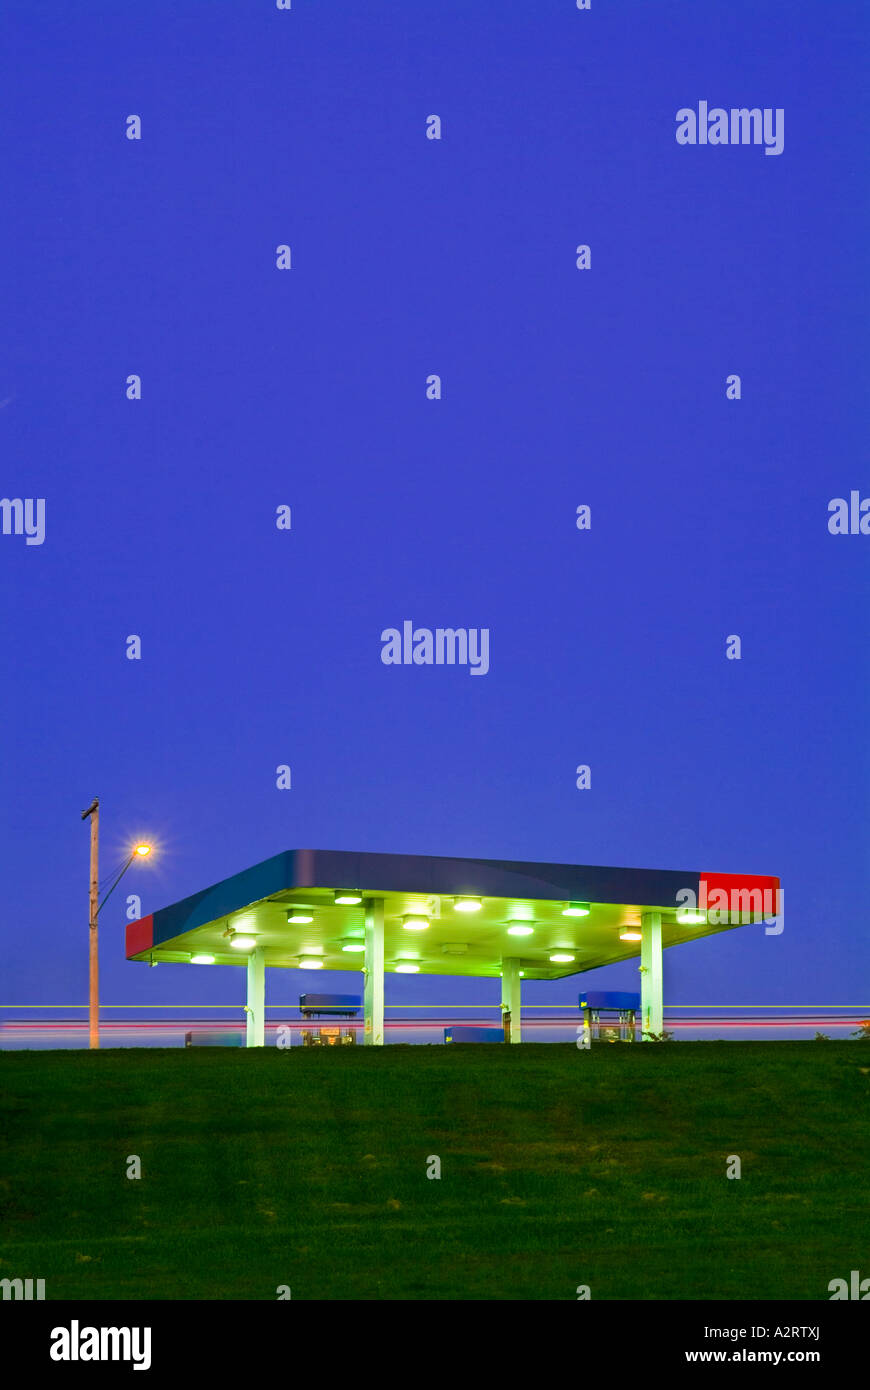 Gasoline Station At Twilight With Bright Lights And Blue Sky Stock Photo